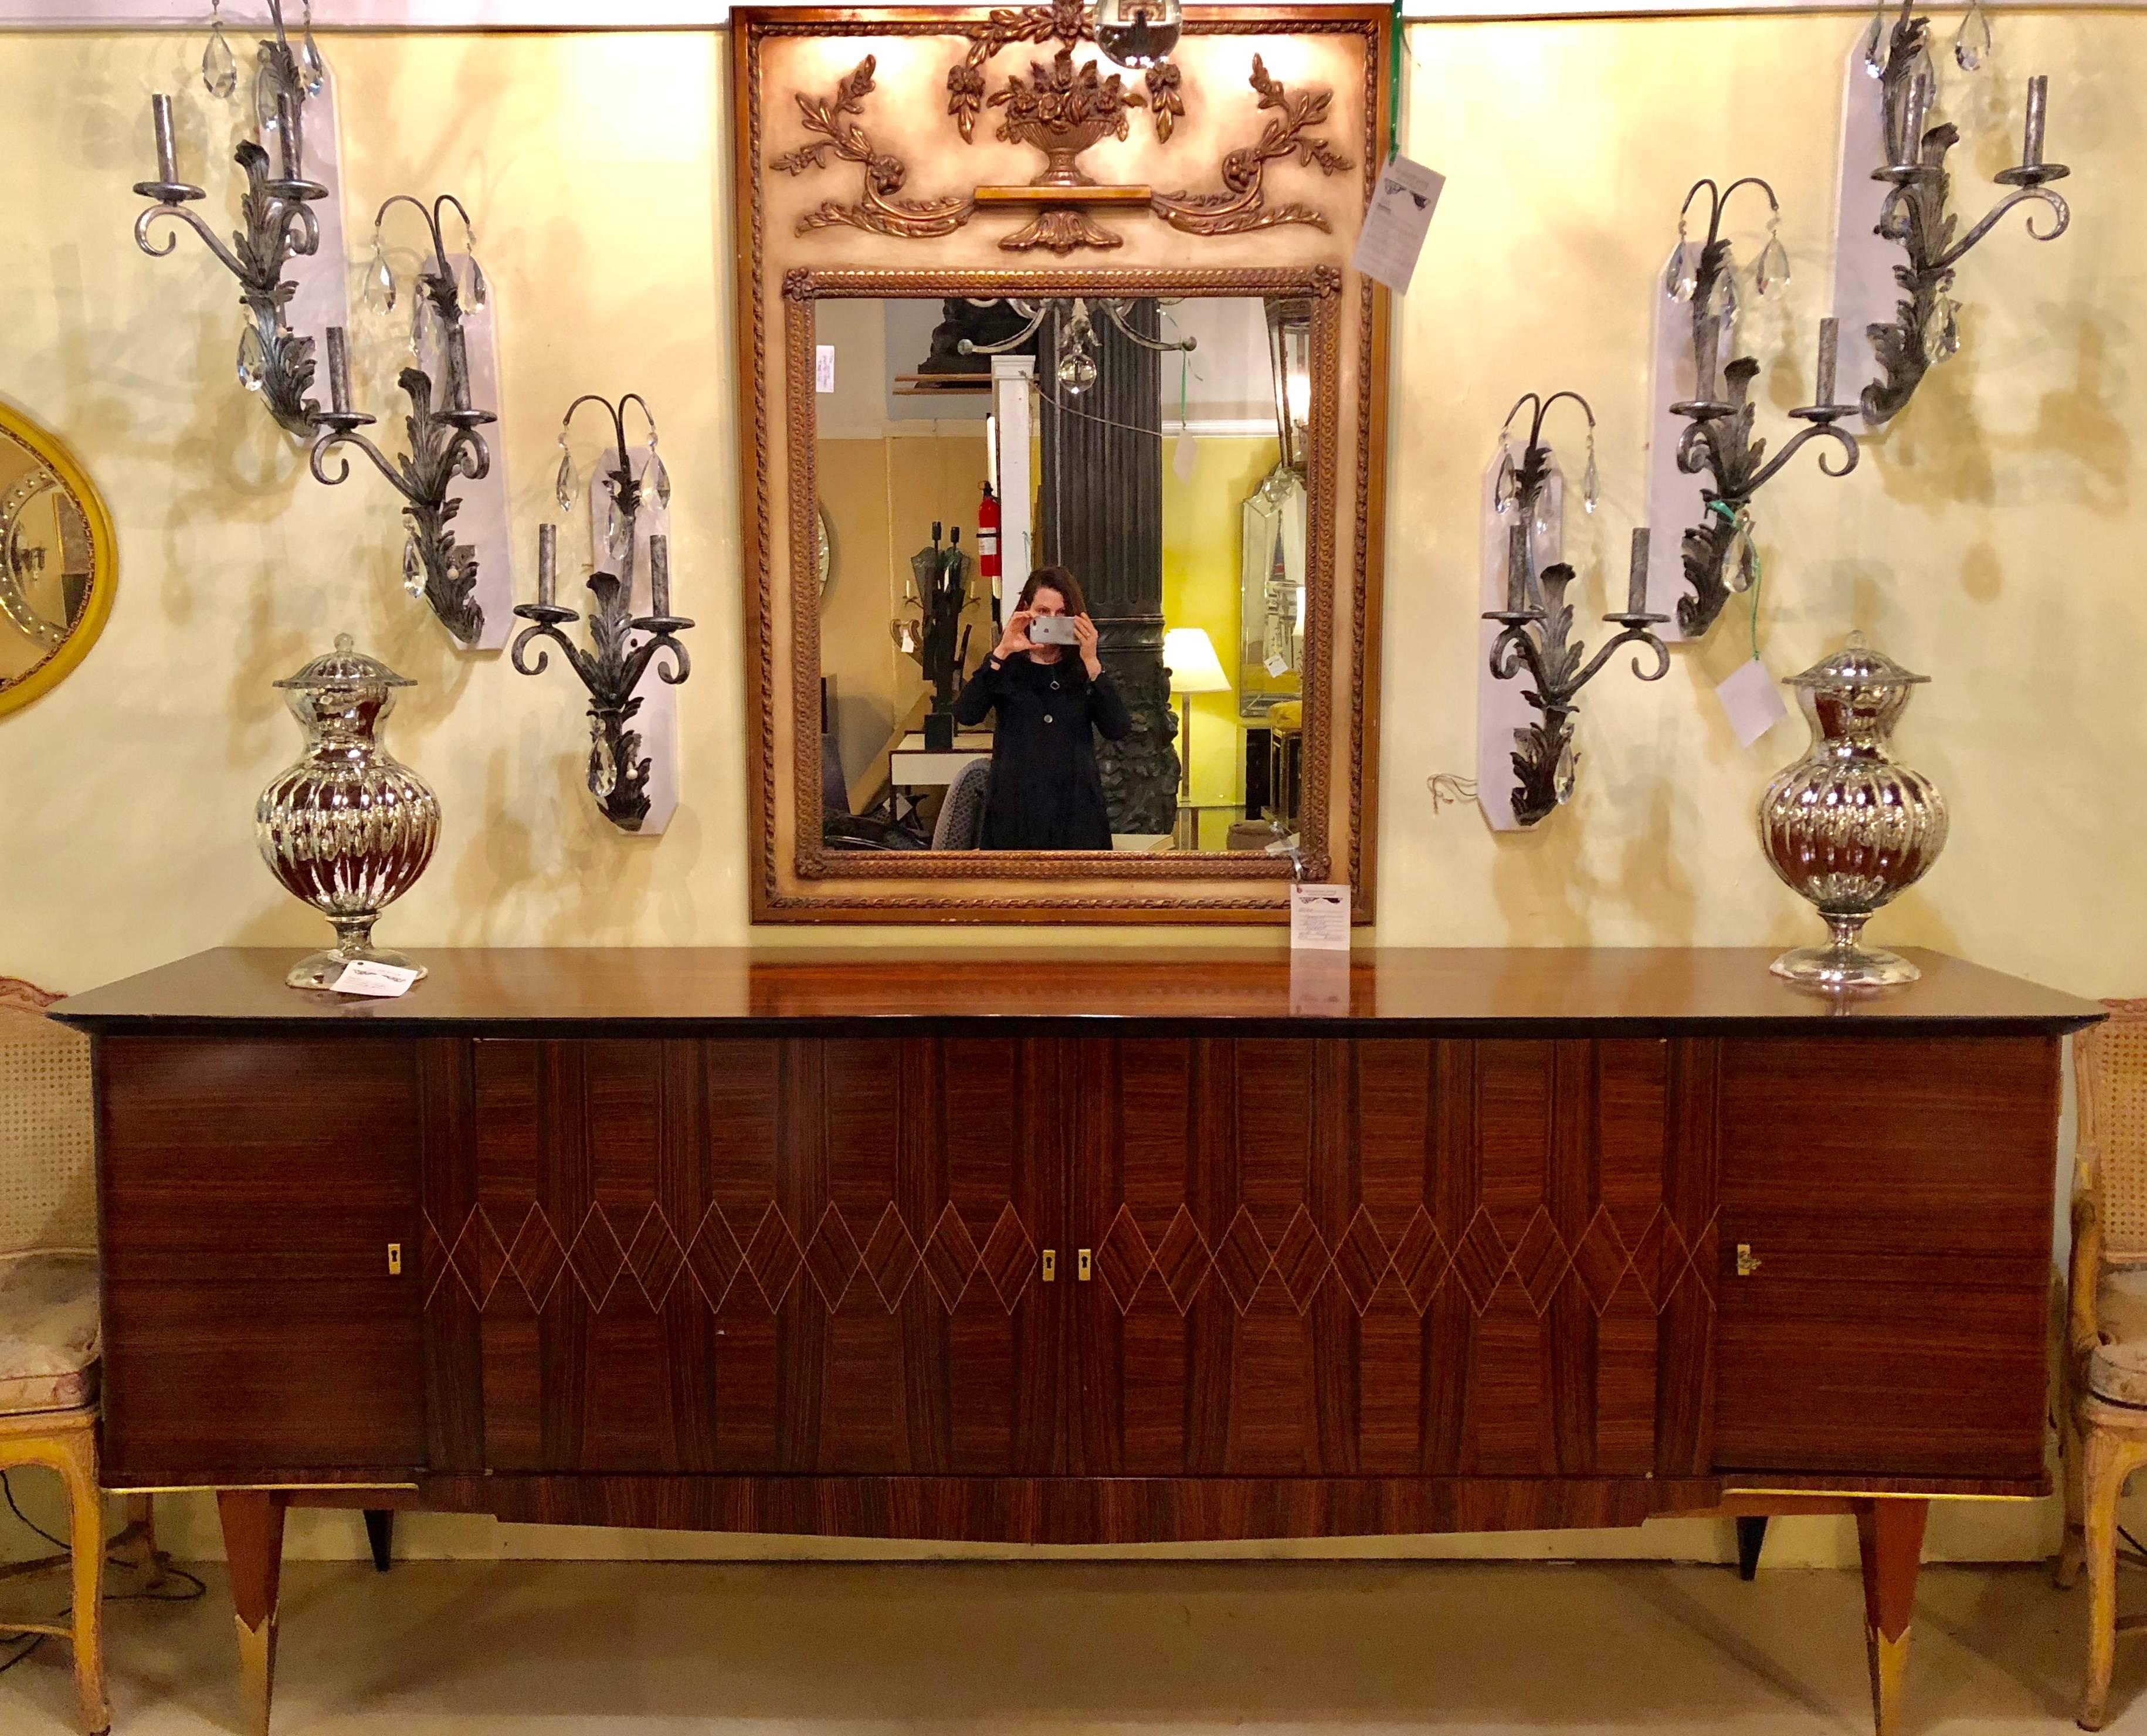 A monumental Art Deco Macassar inlaid sideboard or credenza with a full finished fitted interior having glass shelves. The tapering legs having bronze sabots with a full bronze framed undercarriage supporting a magnificent French deco case of finely